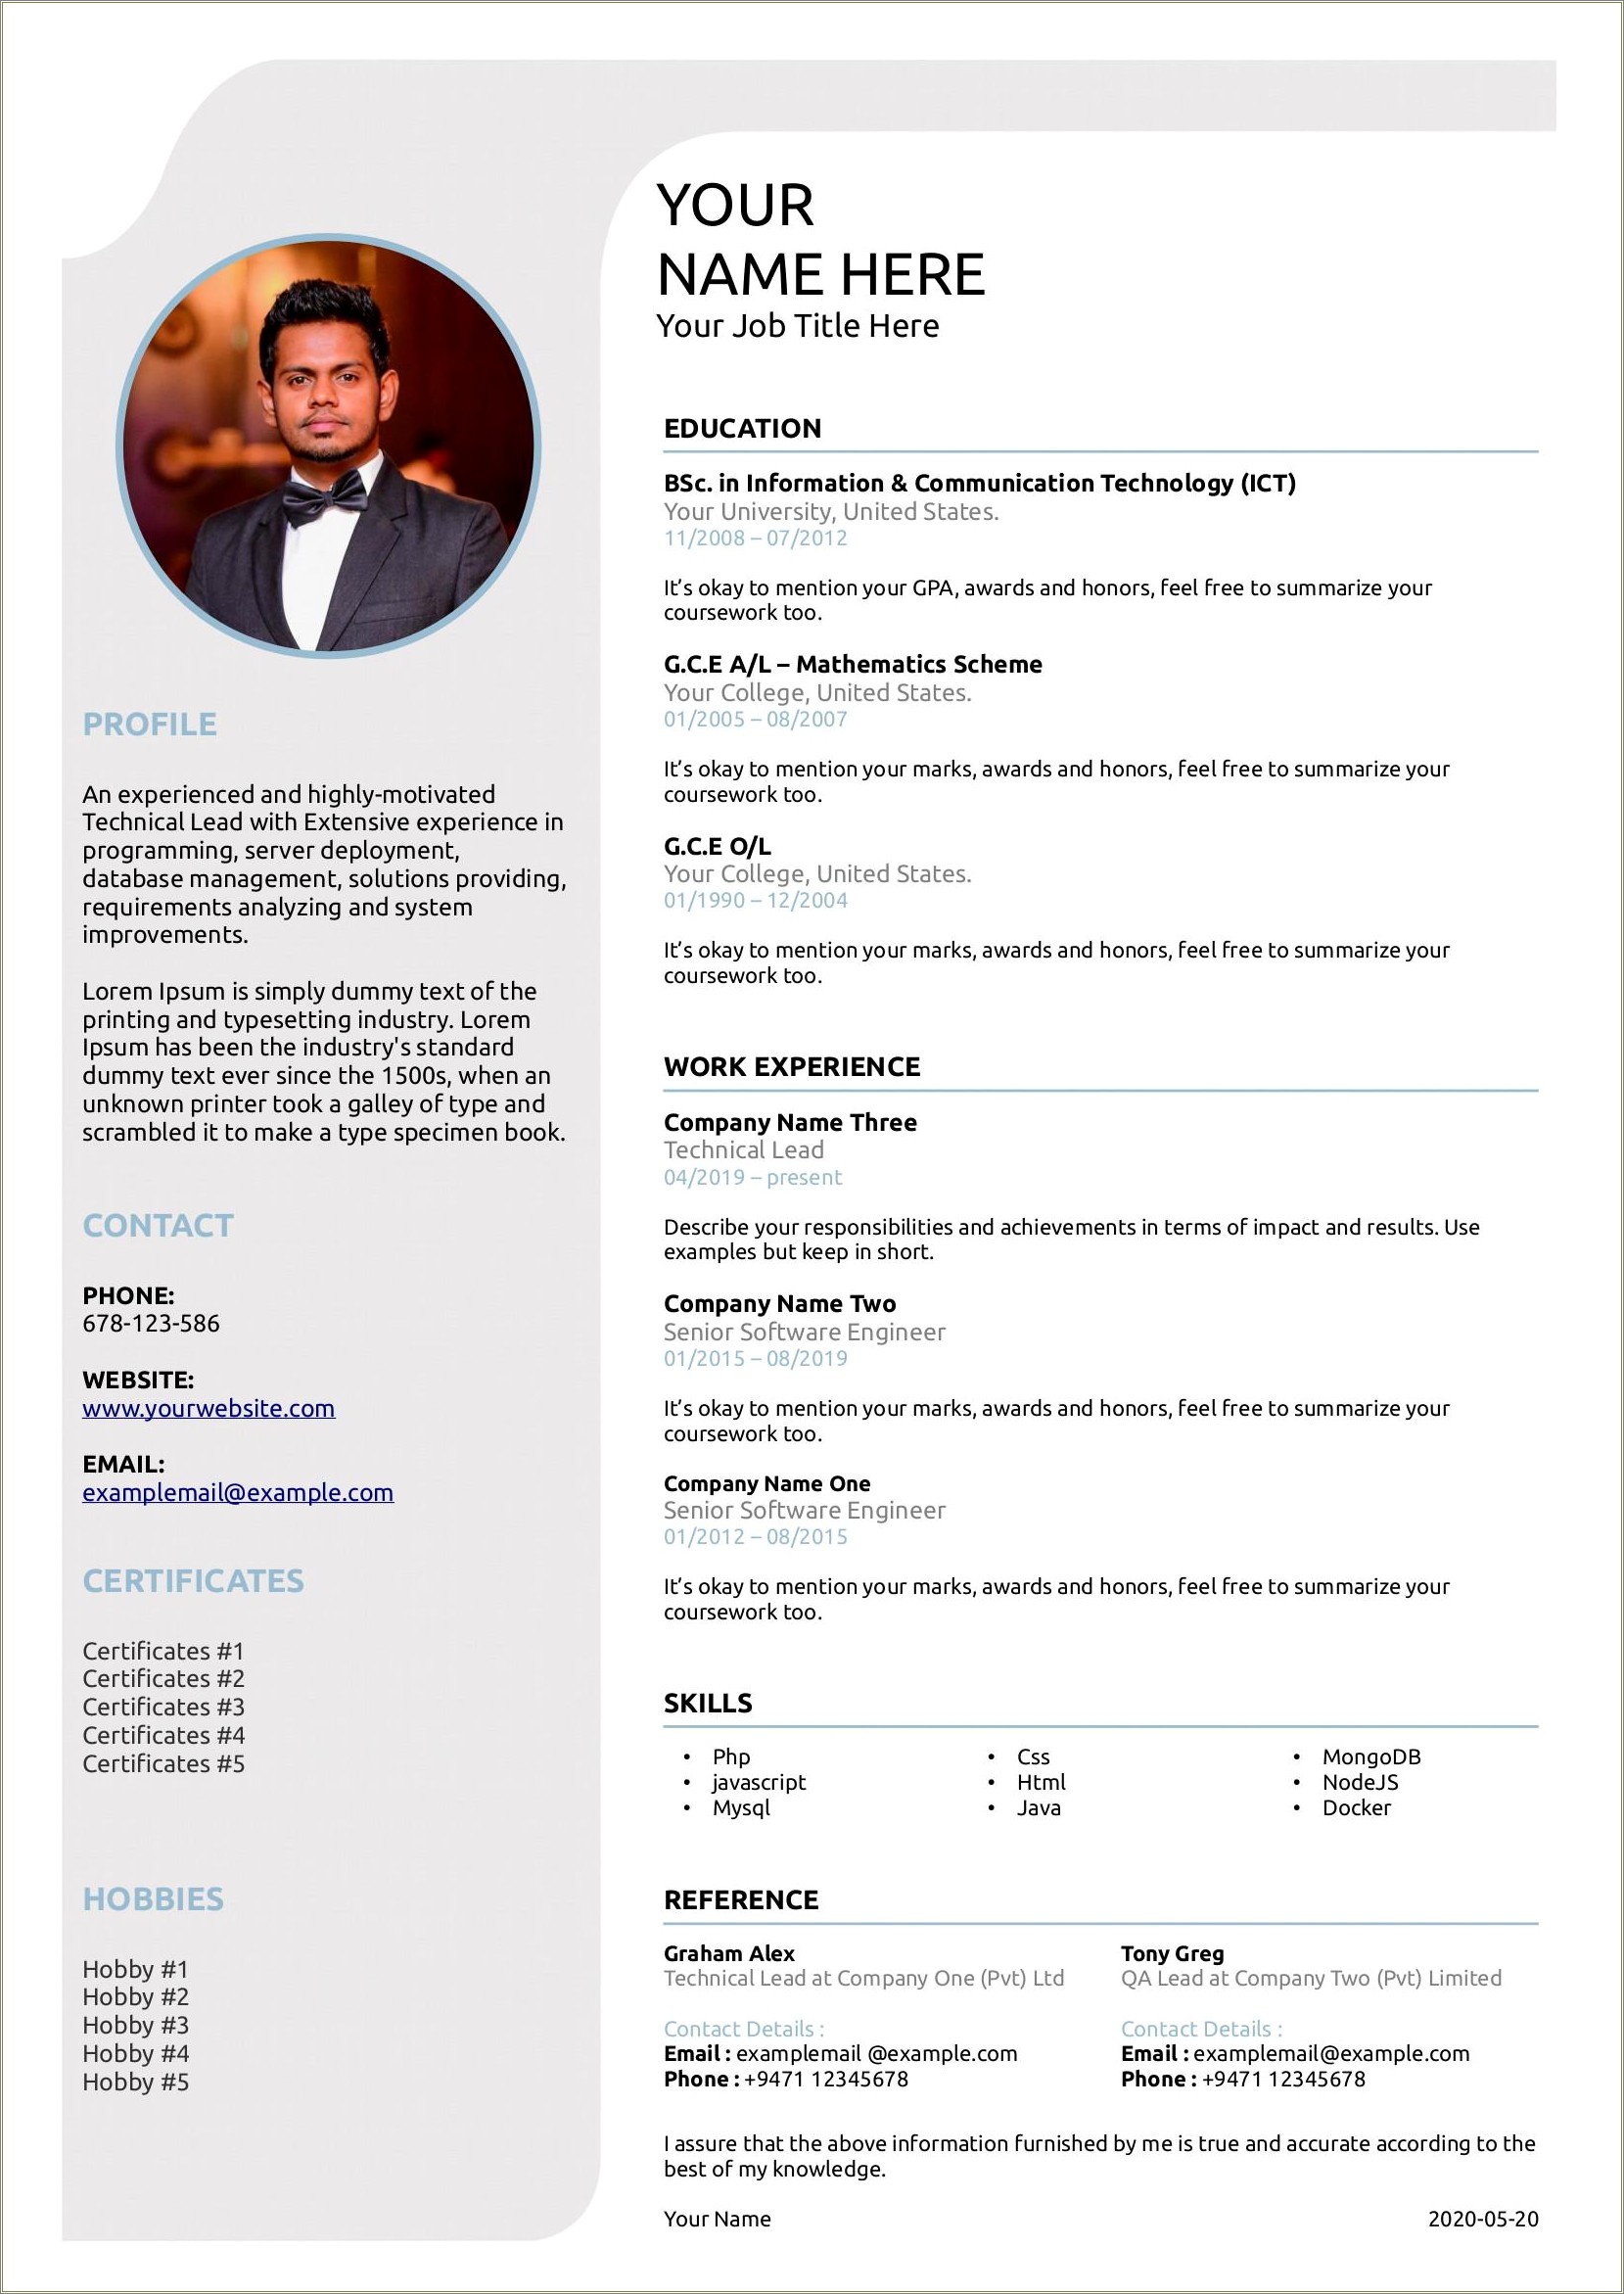 free-resume-templates-2019-free-download-resume-example-gallery